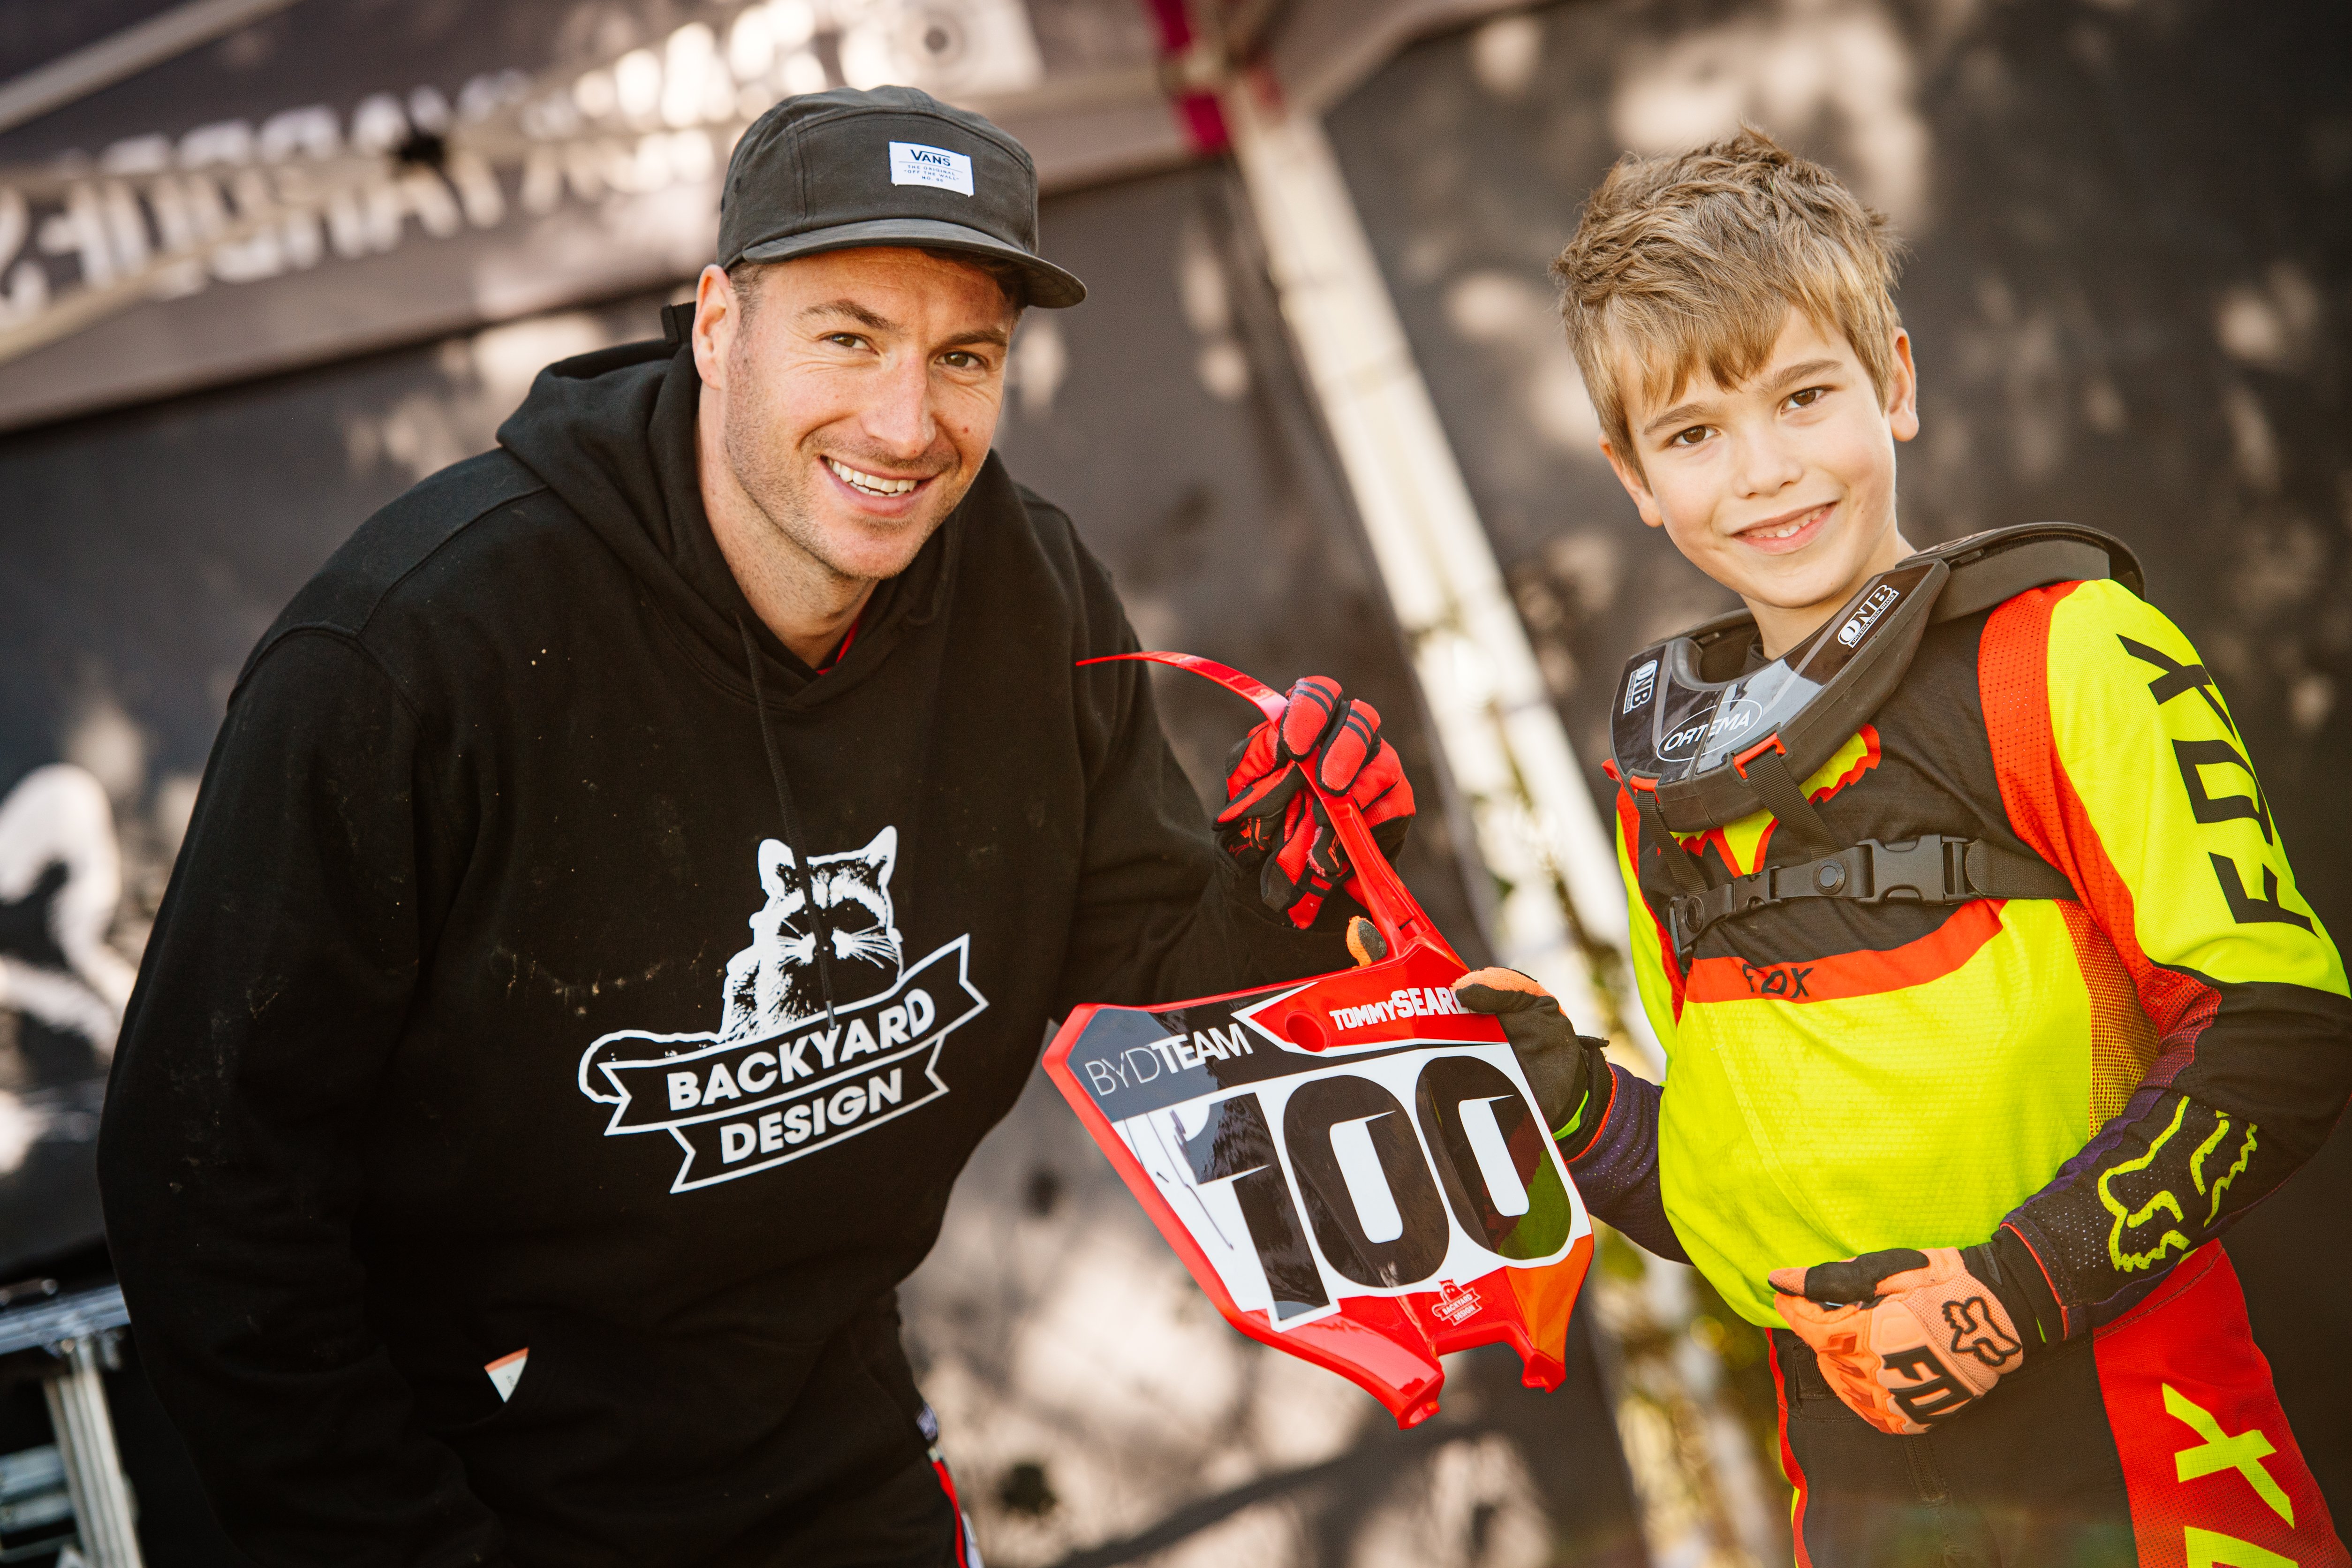 Pro rider Tommy Searle gifting a signed front plate to a young rider